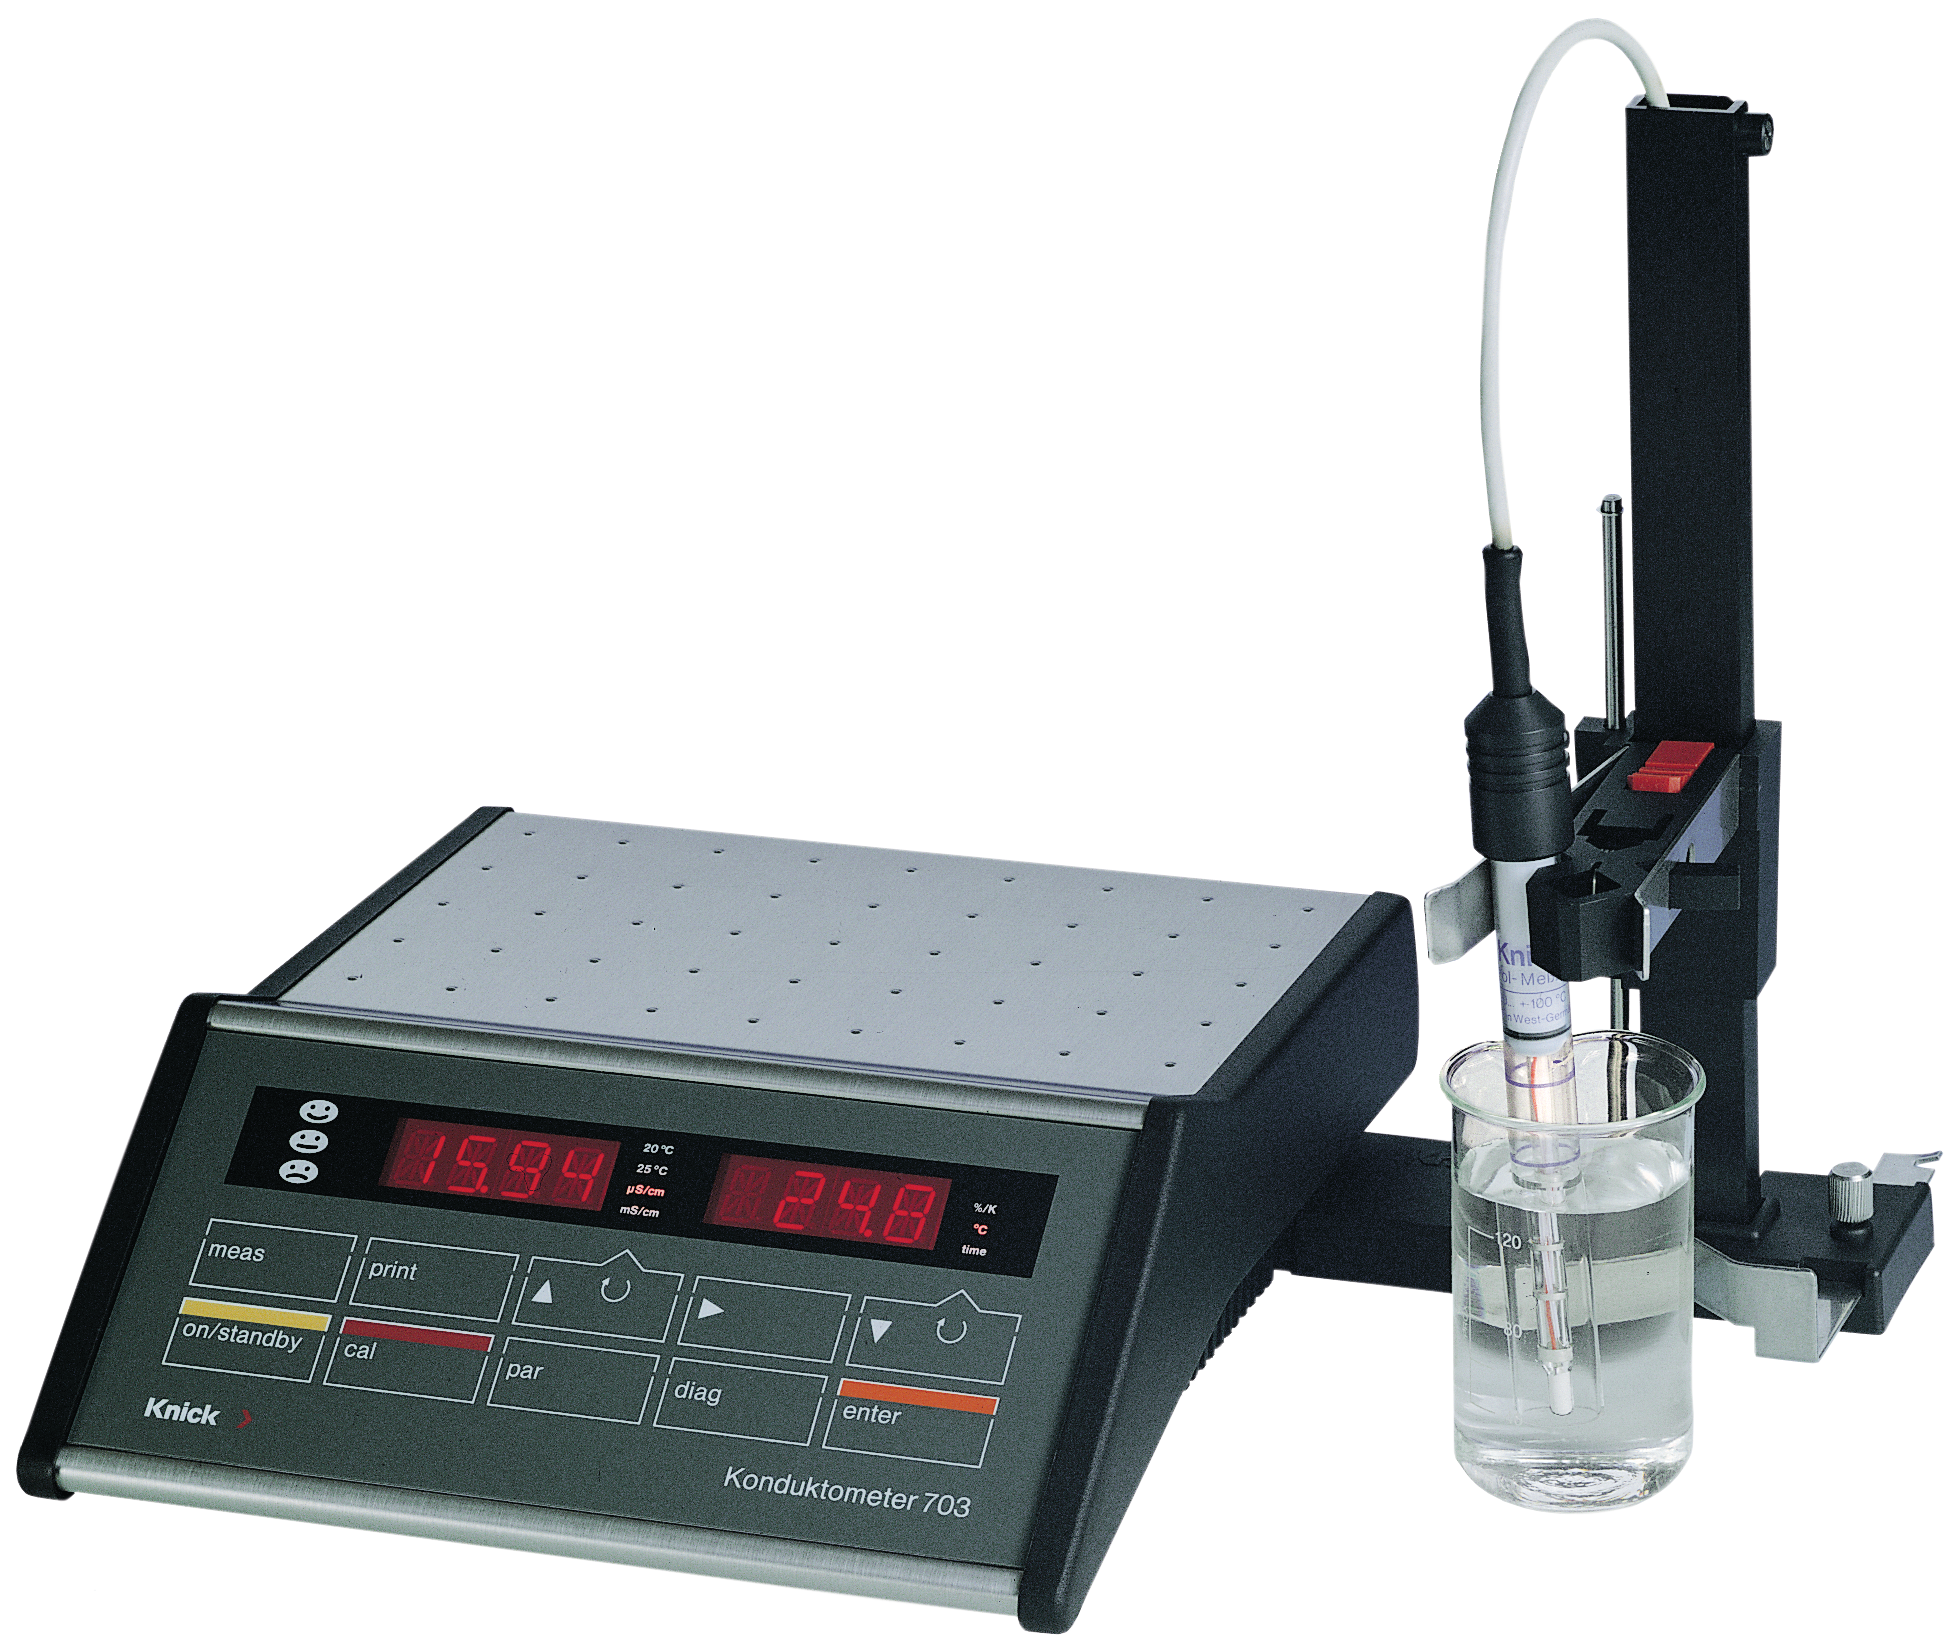 703 Laboratory Conductivity Meter | Automatic device test (Fullcheck) and calibration | Records for QM documentation according to ISO 9000 and GLP